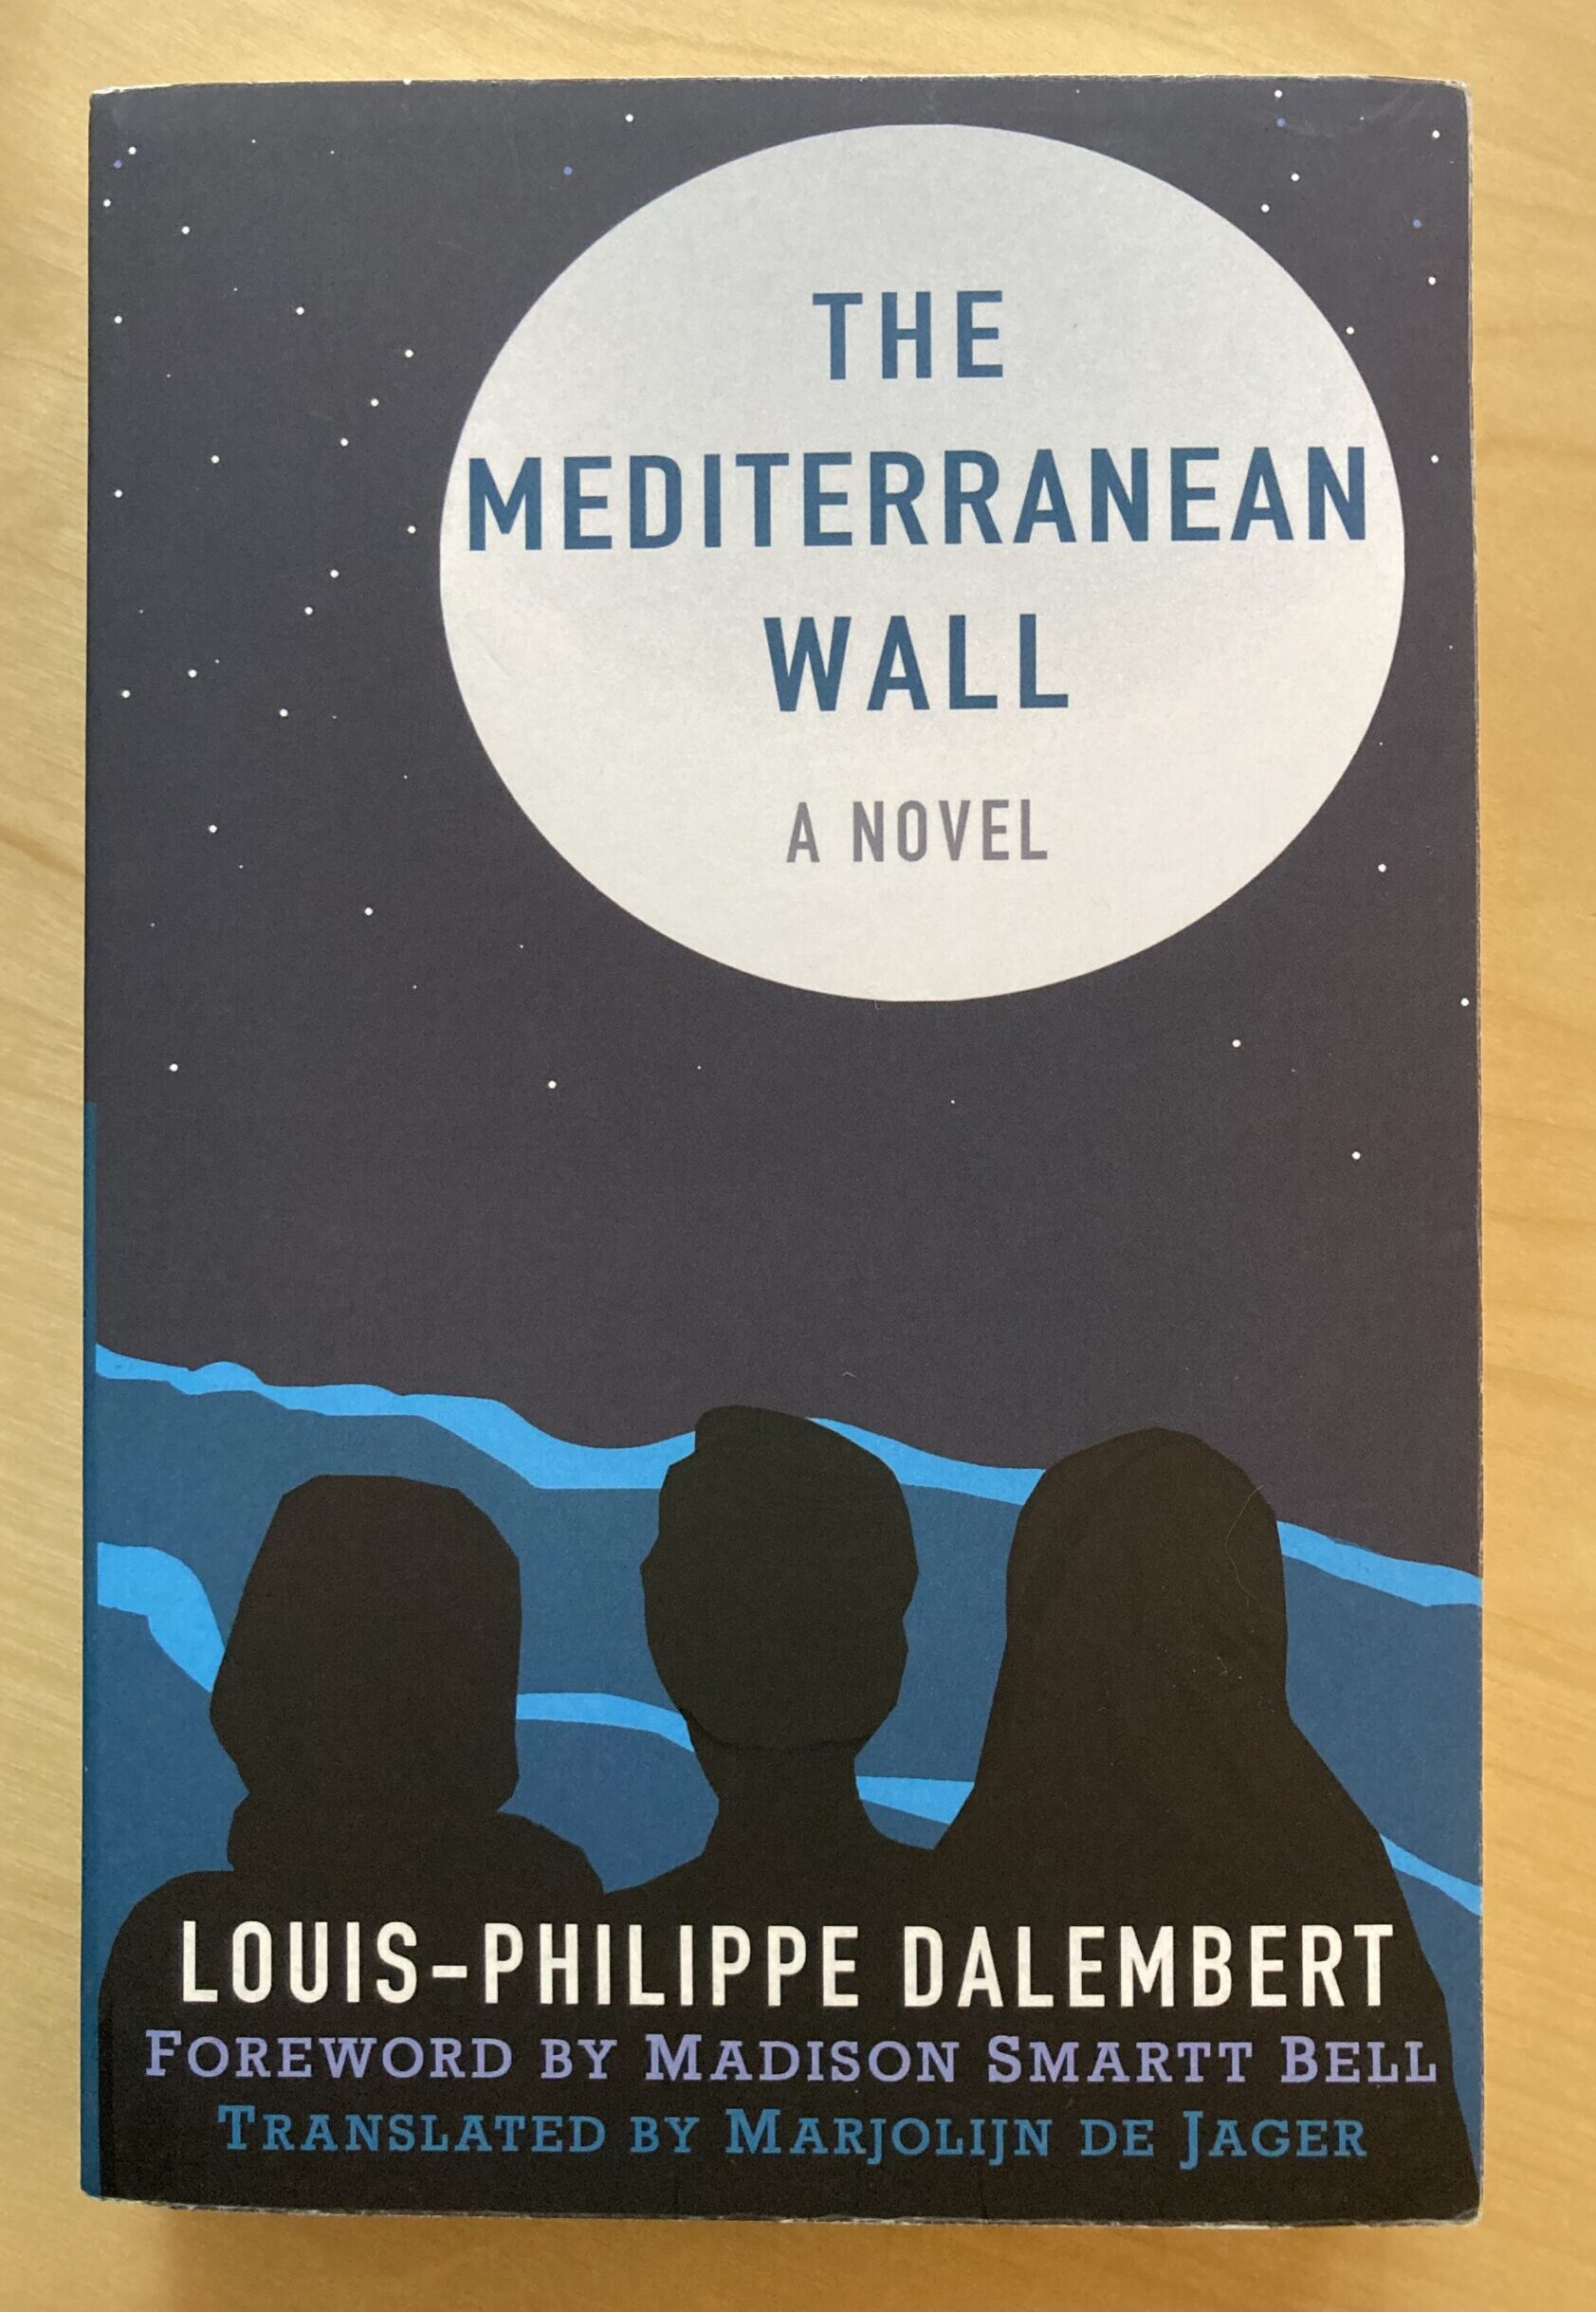 The Mediterranean Wall by By Louis-Philippe Dalembert, translated by Marjolijn de Jager